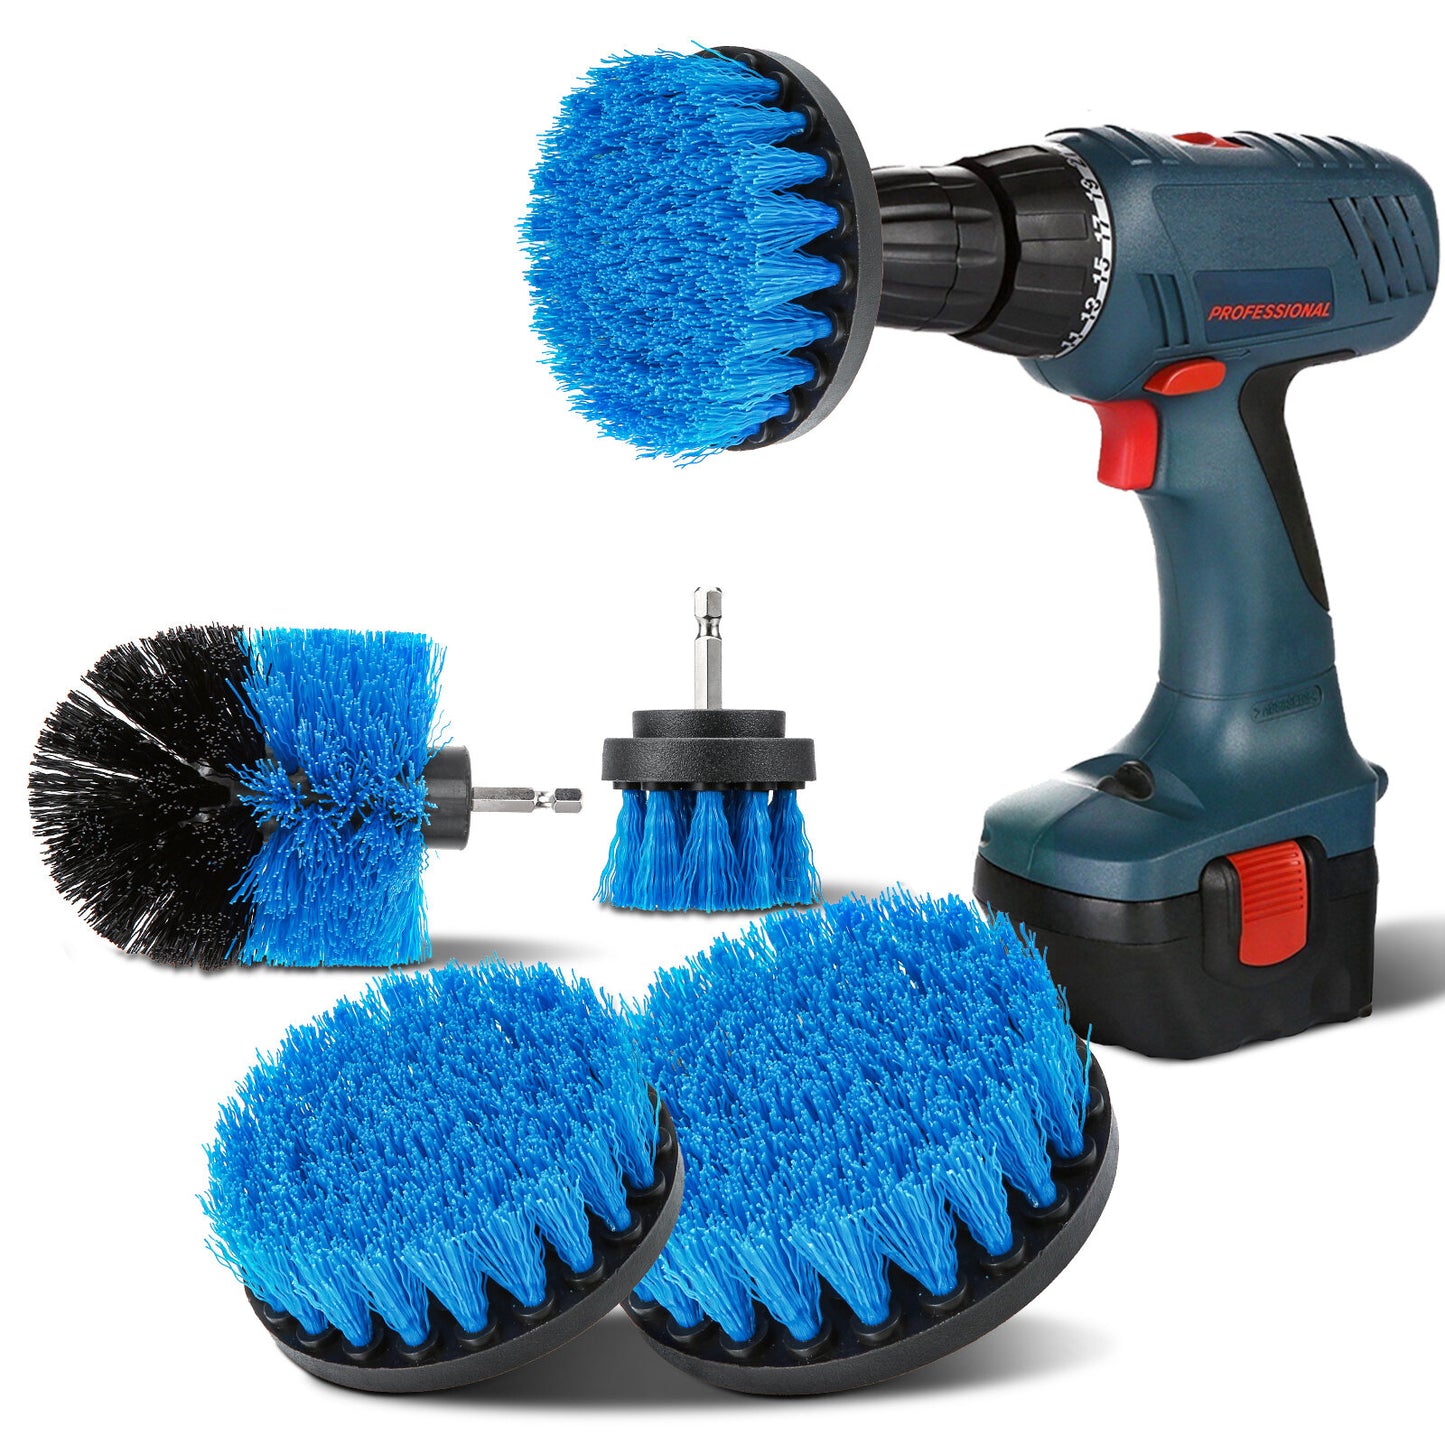 Car Drill Brush Attachment Electric Drill Brushes Cleaning Tools 4 Pieces